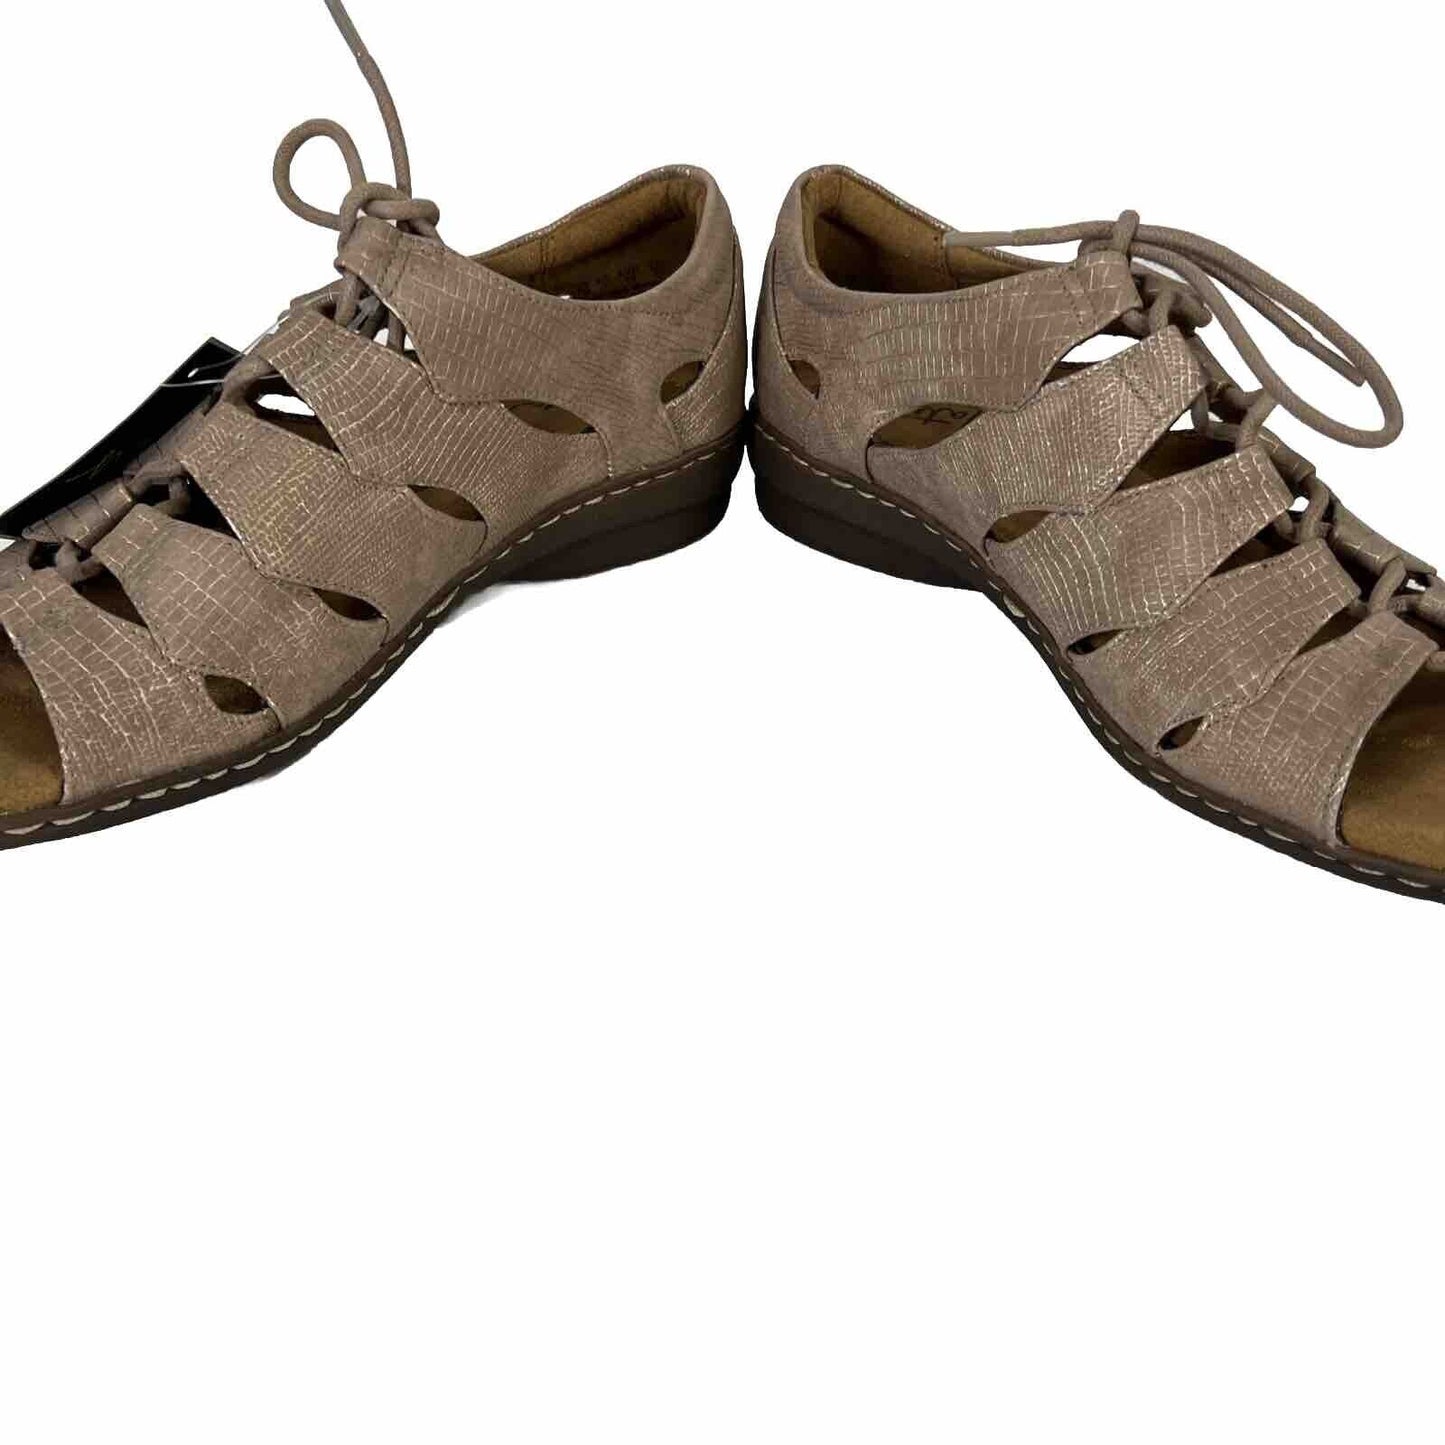 NEW Natural Soul Women's Tan/Rose Lace Up Low Gladiator Sandals - 9